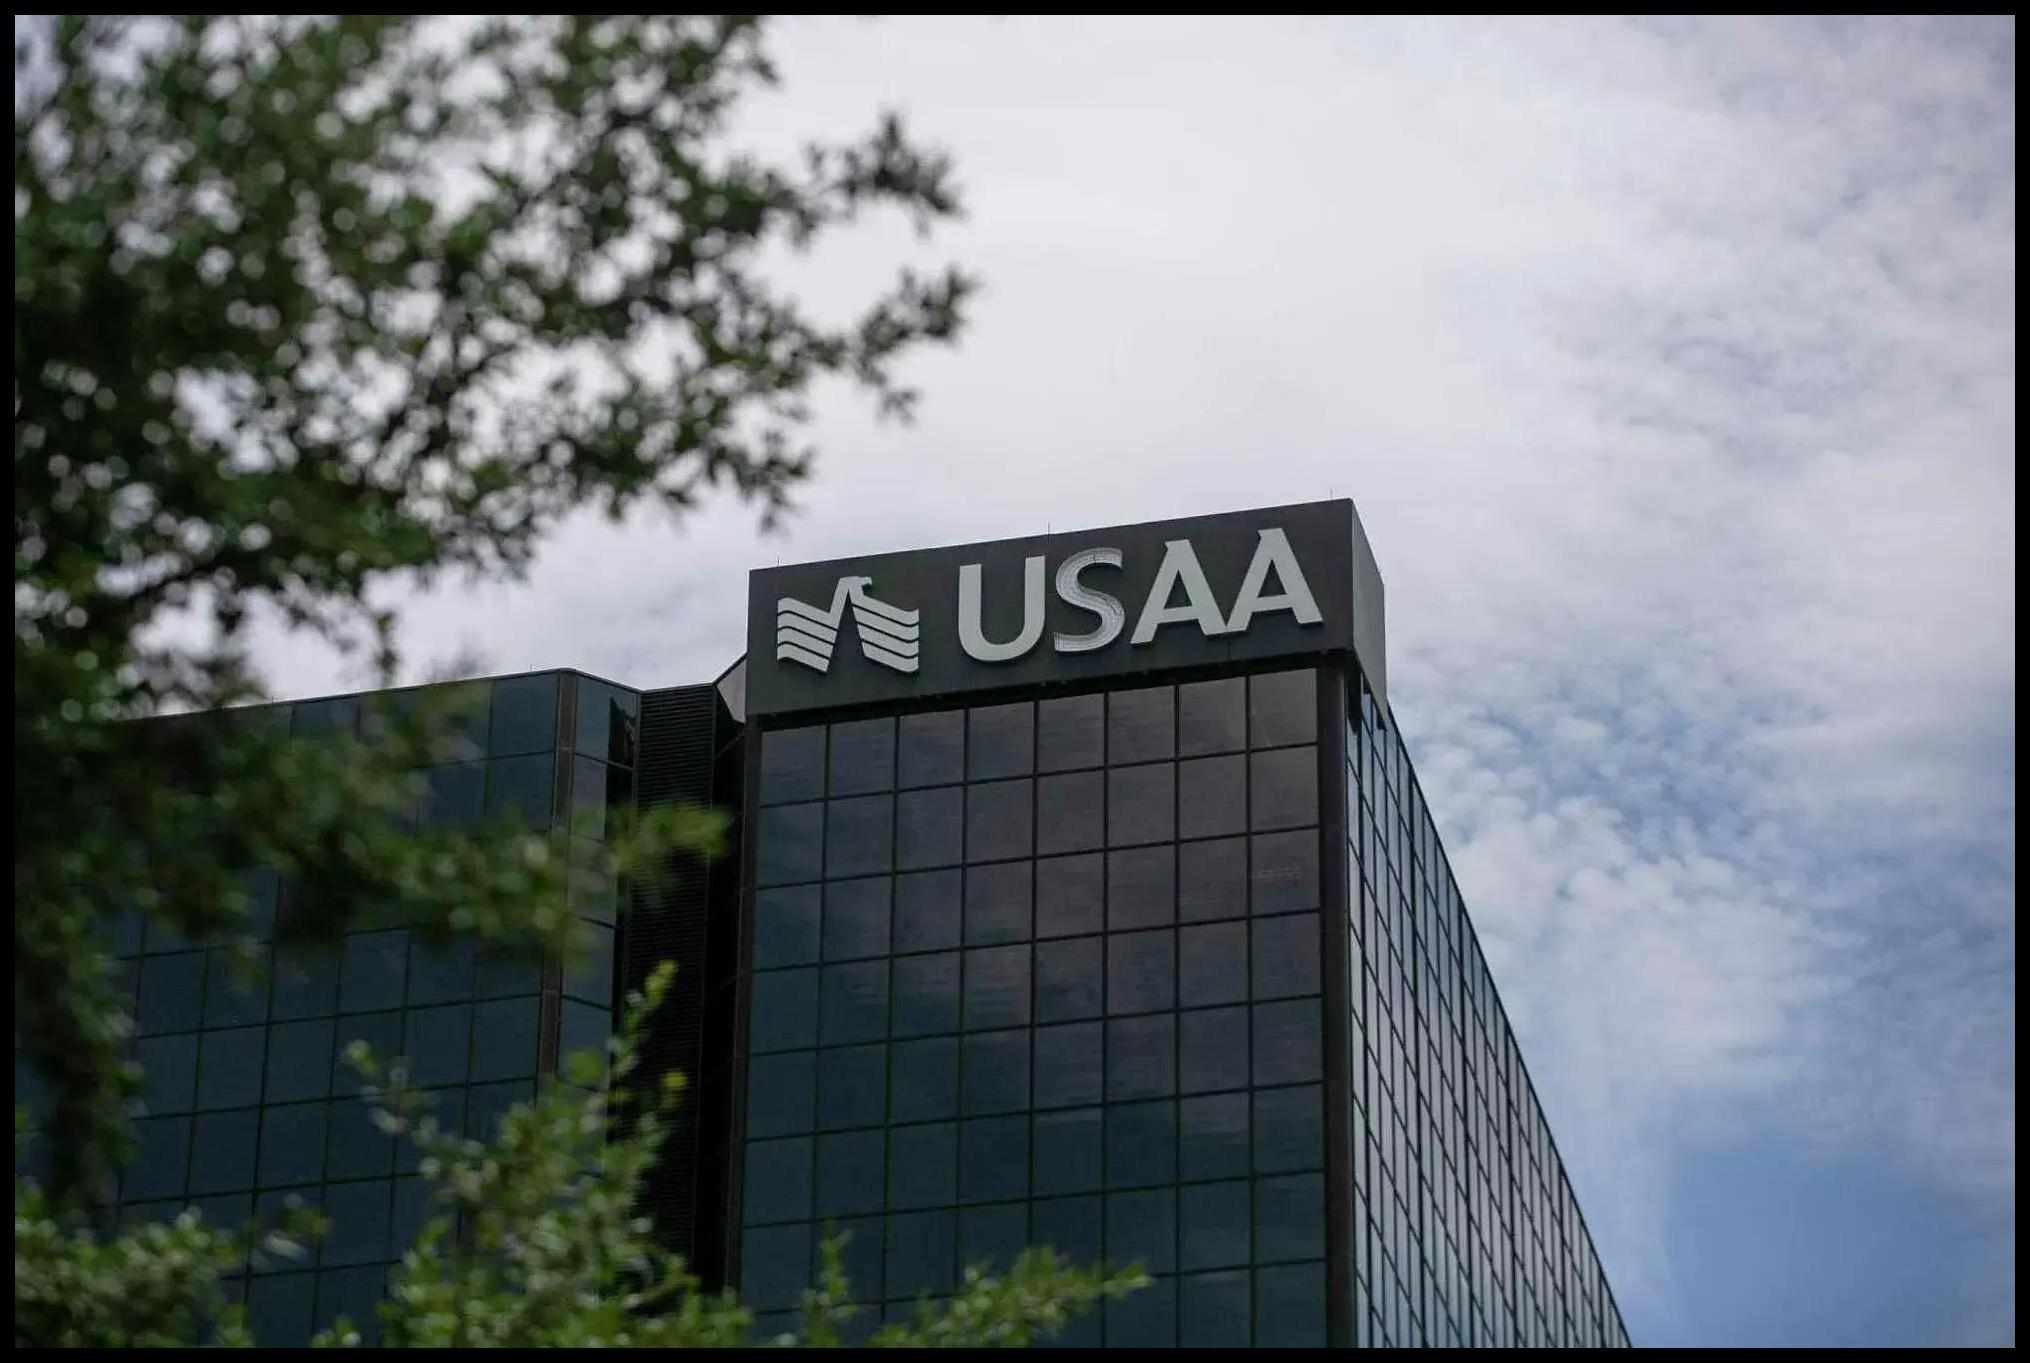 USAA Employee Suicide: Tragic Loss at USAA's Headquarters